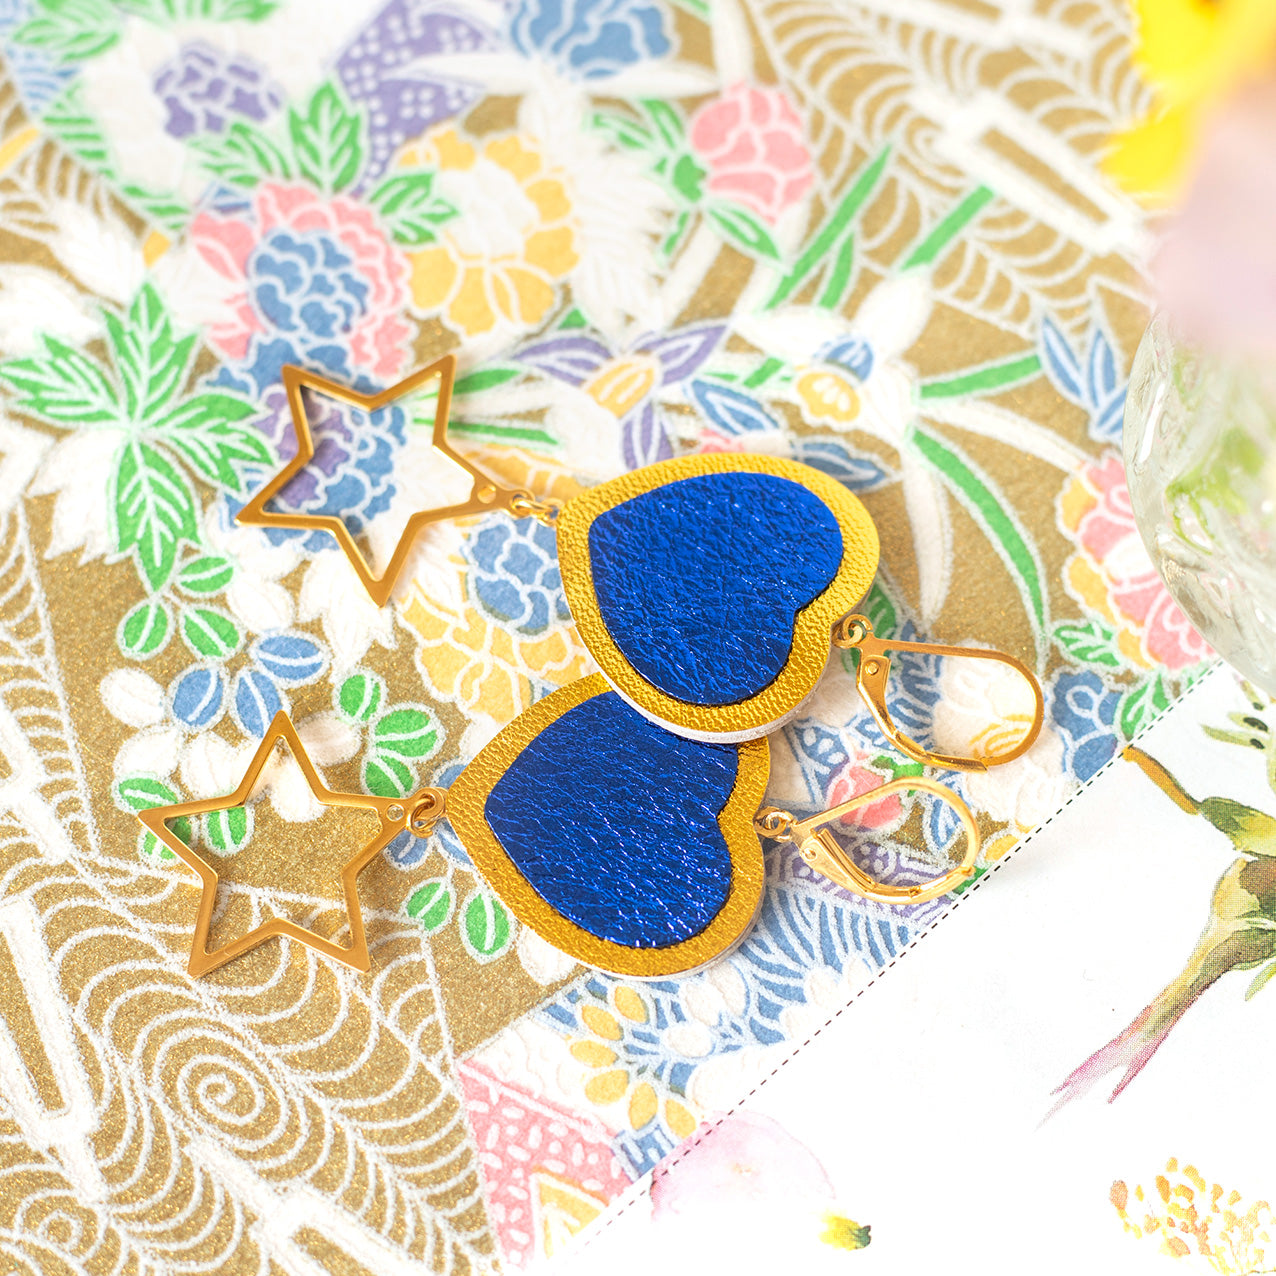 Heart earrings in gold and ultramarine leather and gold stars